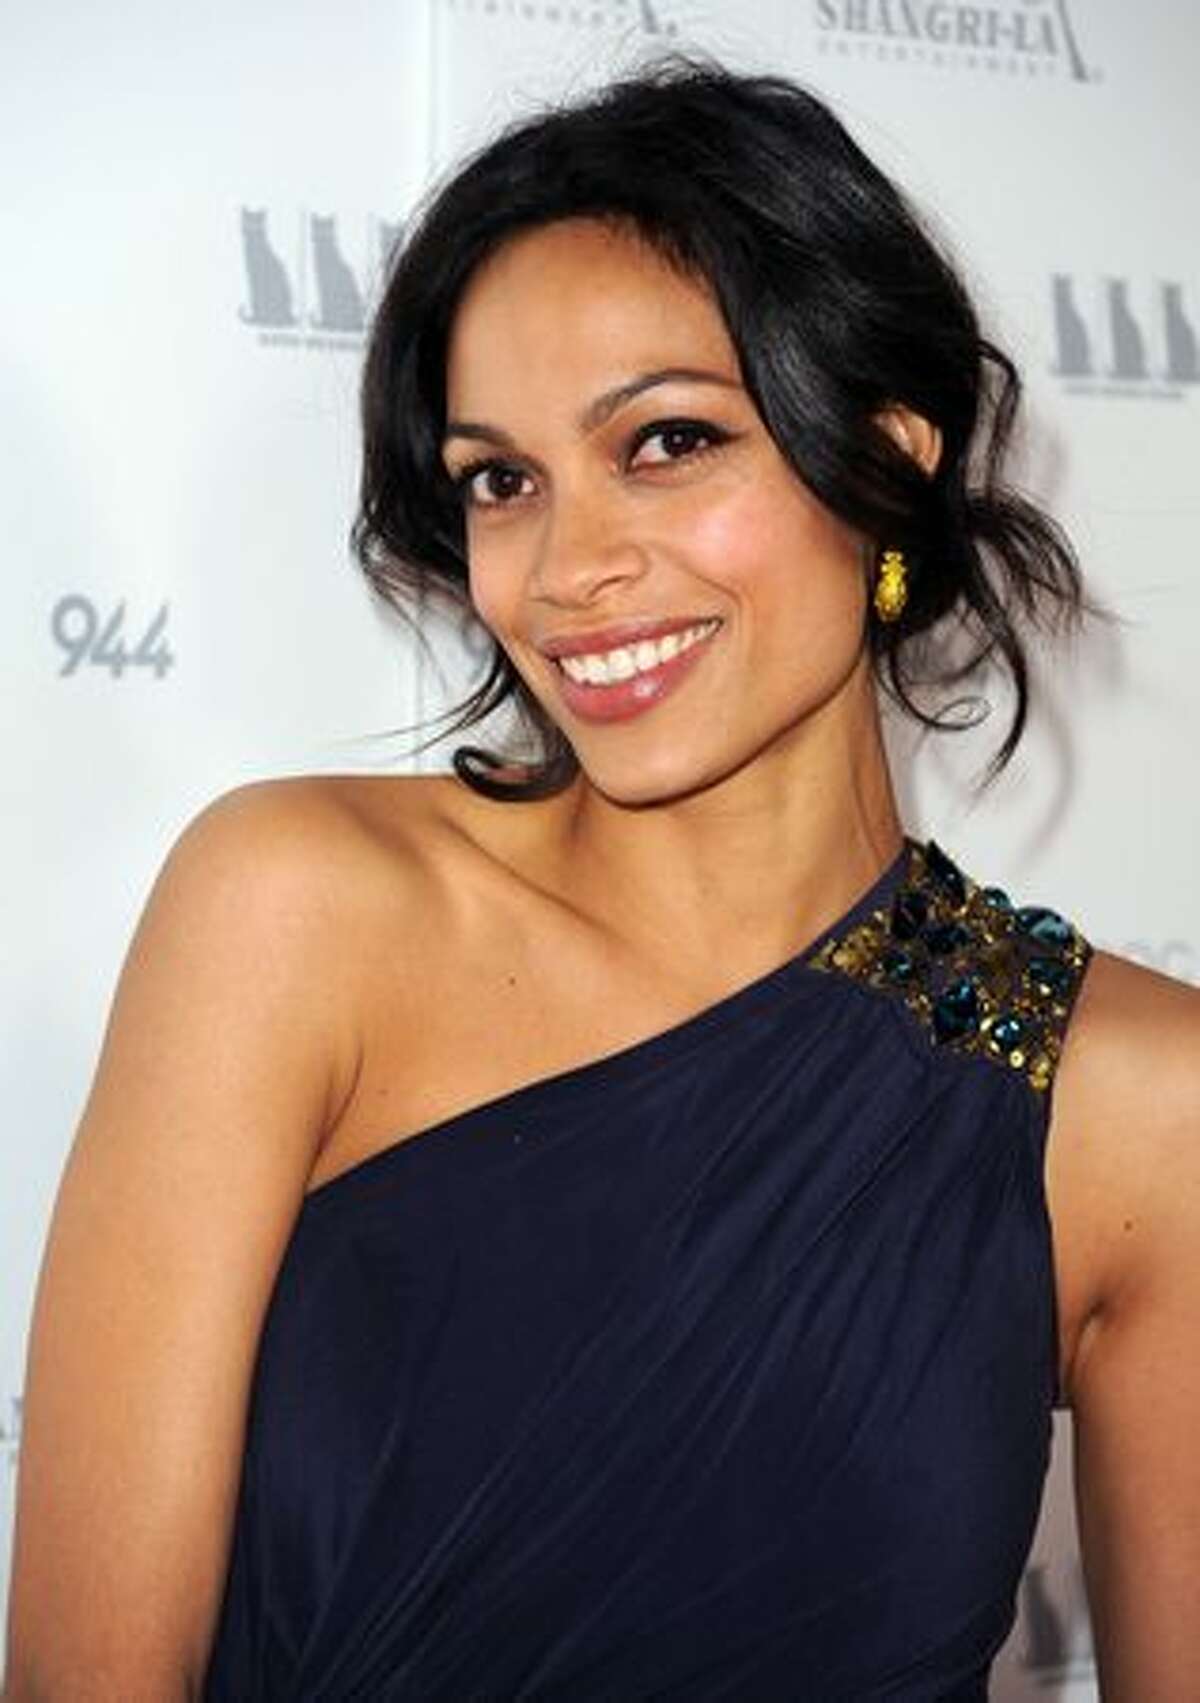 Actress Rosario Dawson arrives at the premiere Of Shangri-La Entertainment's "Girl Walks Into A Bar" held at the ArcLight Cinemas in Los Angeles, California.